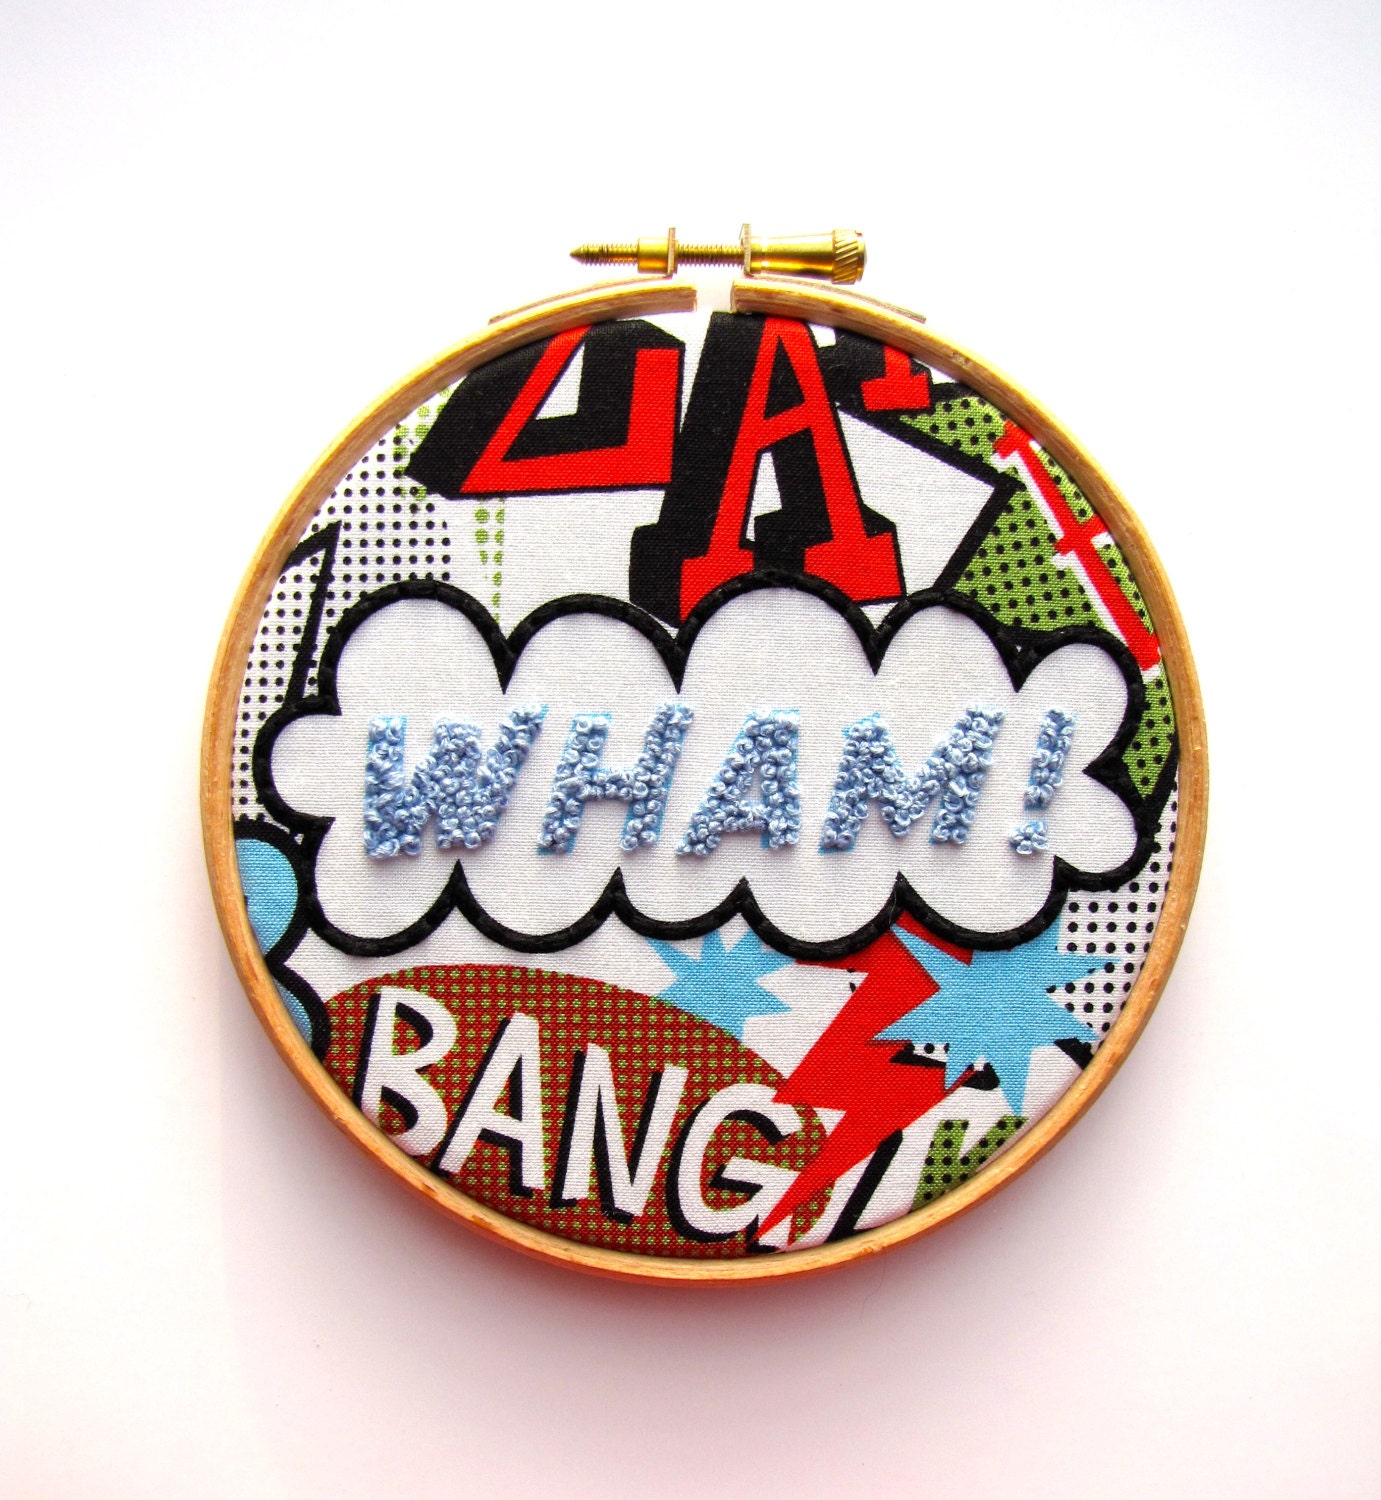 WHAM - Hand Embroidery Hoop Art - Bright Bold Colours - Comic Book - Superhero - 5x5 inch Hoop by mirrymirry - mirrymirry